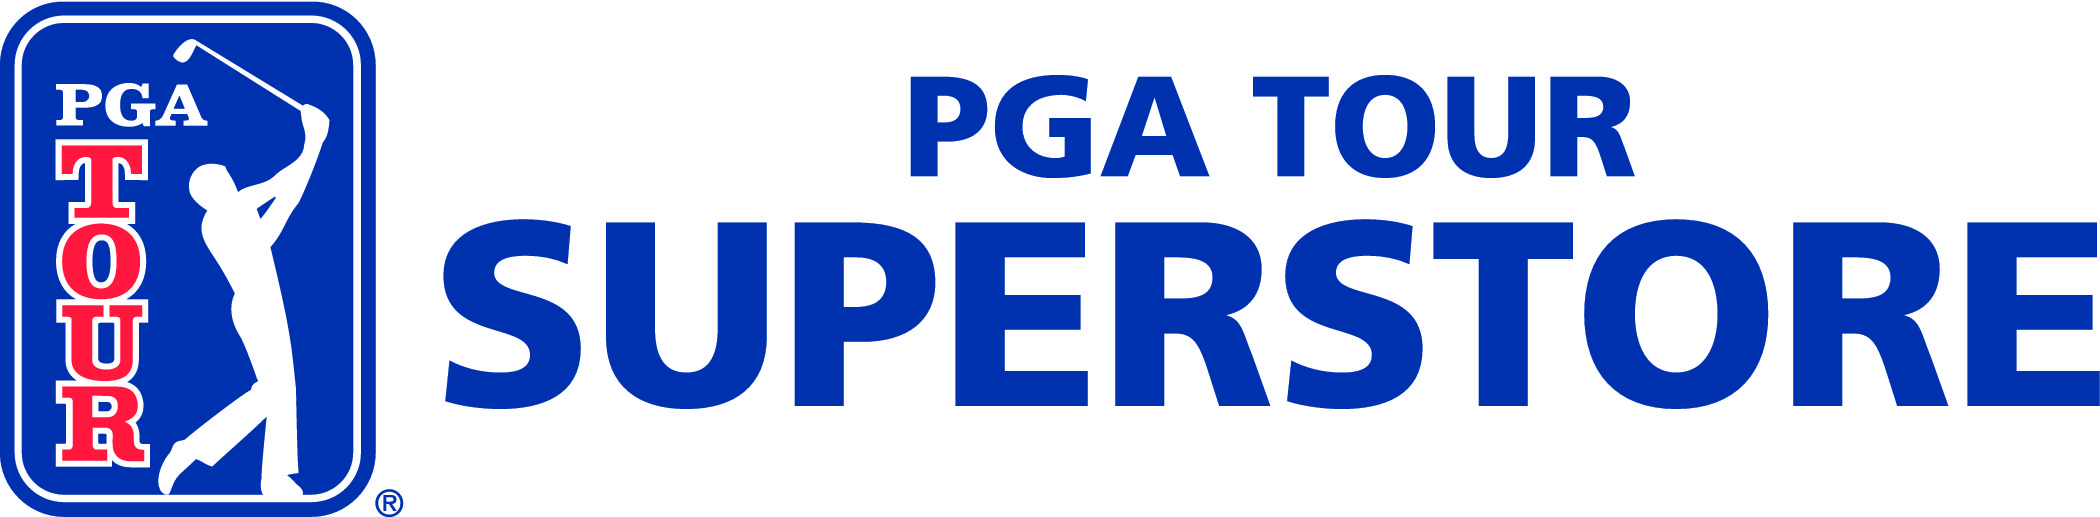 PGA TOUR Superstore Announces Opening of 19th Location in Westbury, New